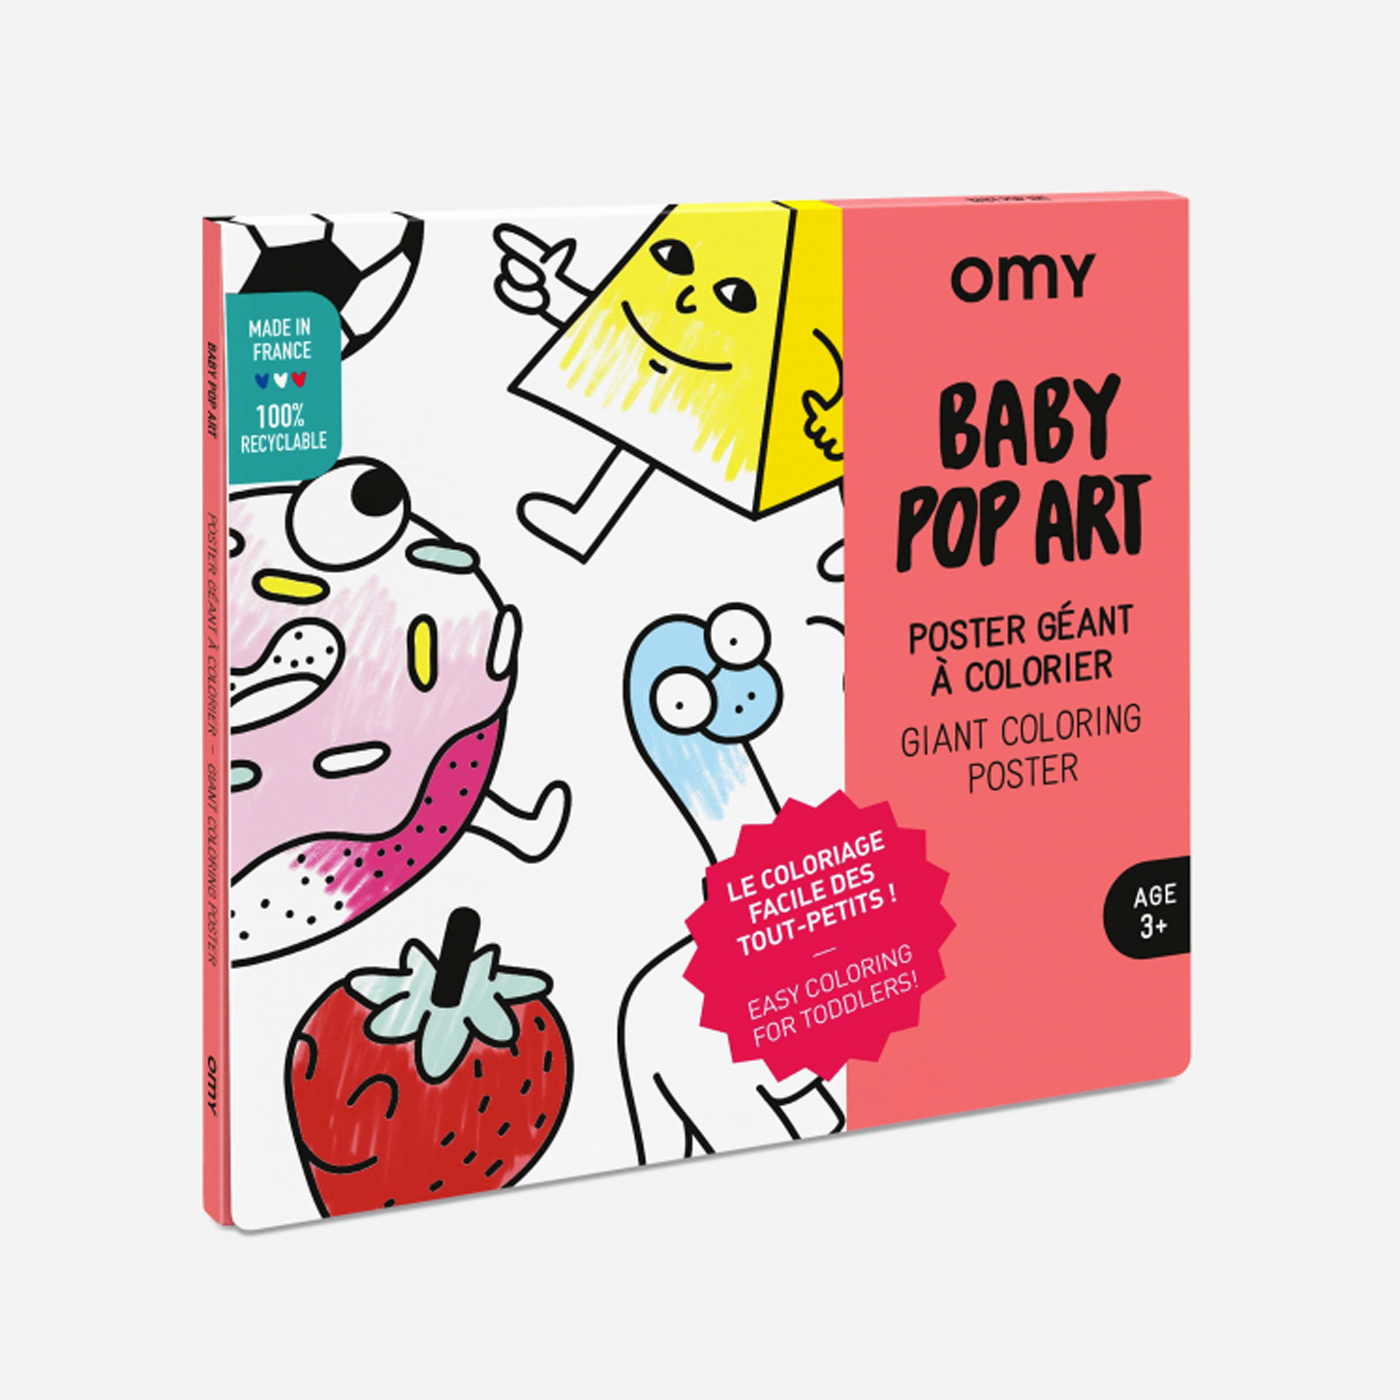  Omy Coloring Poster  | Baby Pop Art